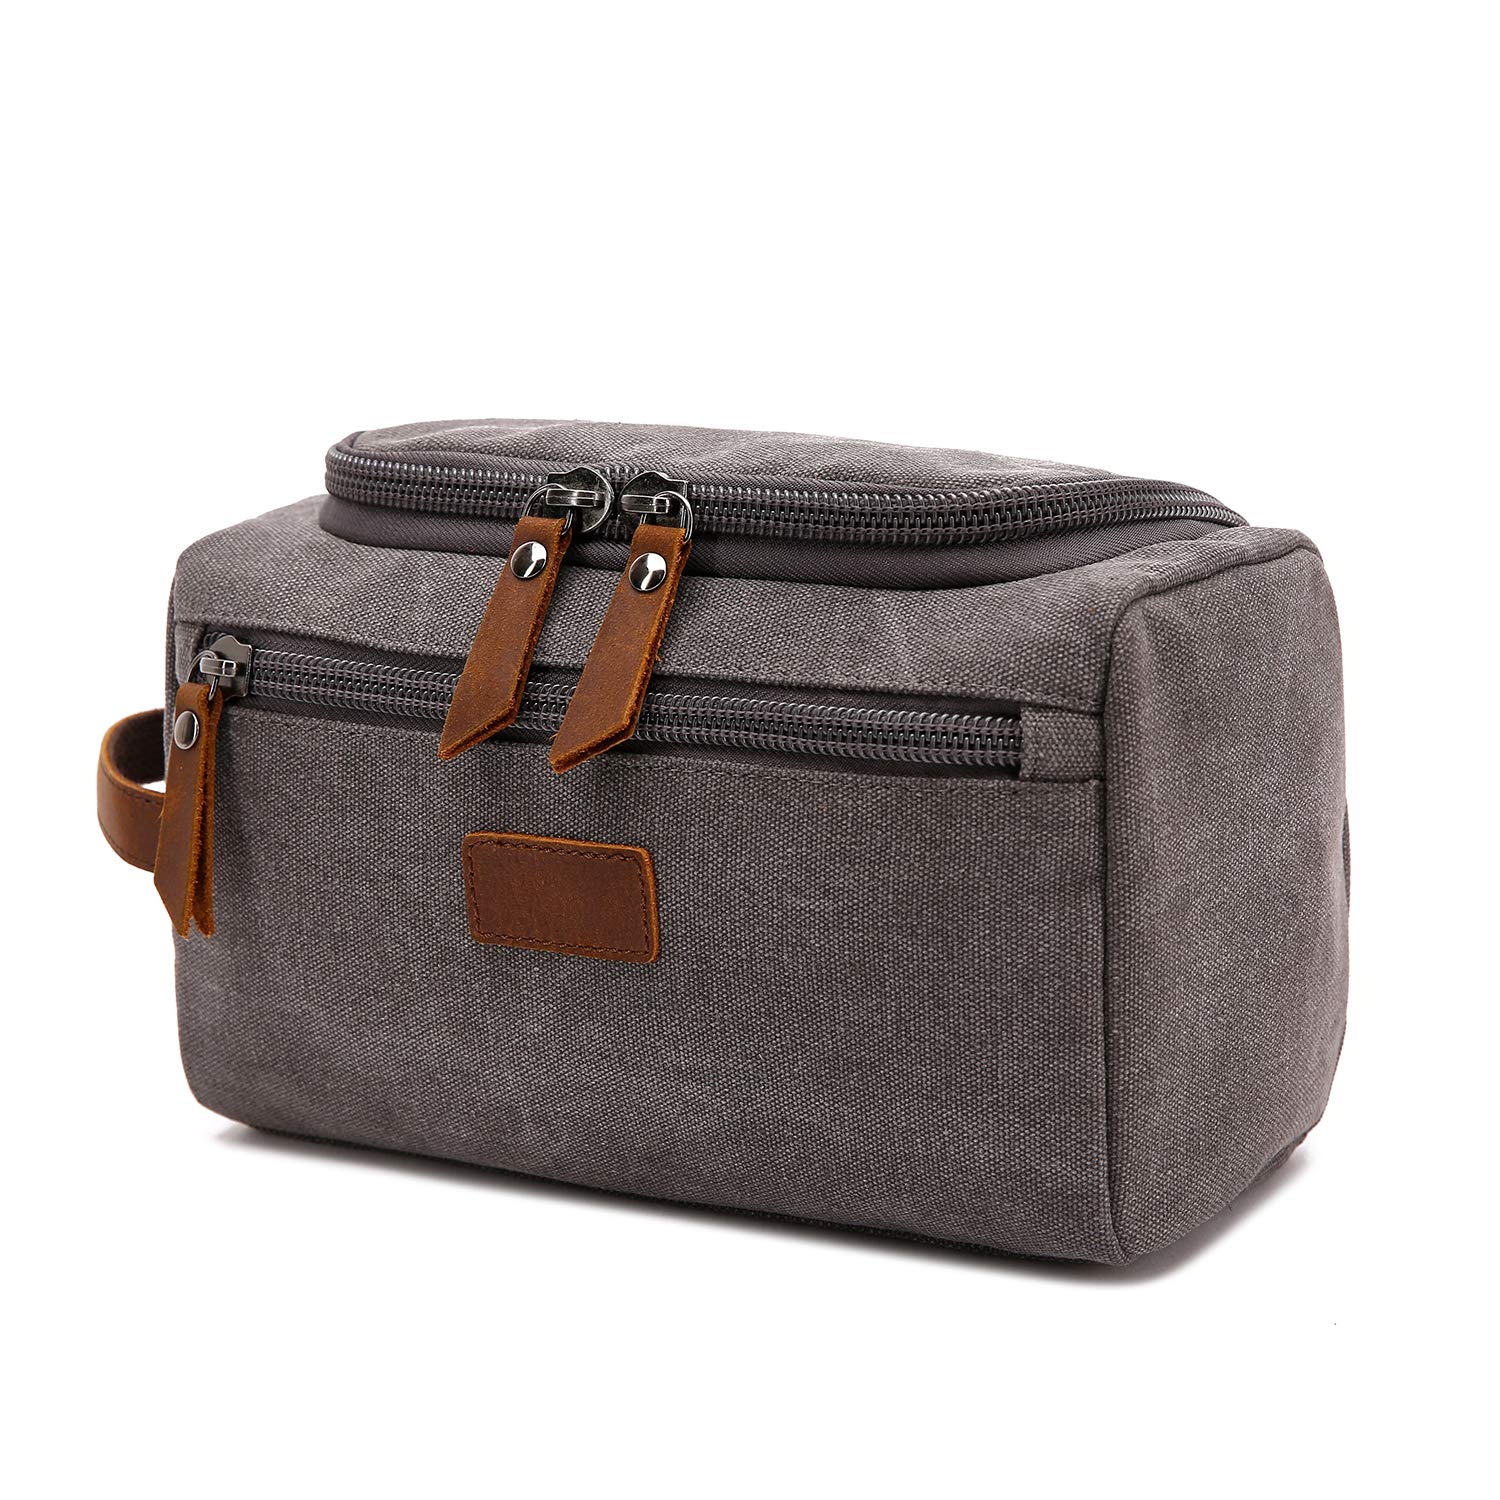 Groomsmen Gifts Personalized Canvas Dopp Kit Monogrammed Toiletry Bag ...